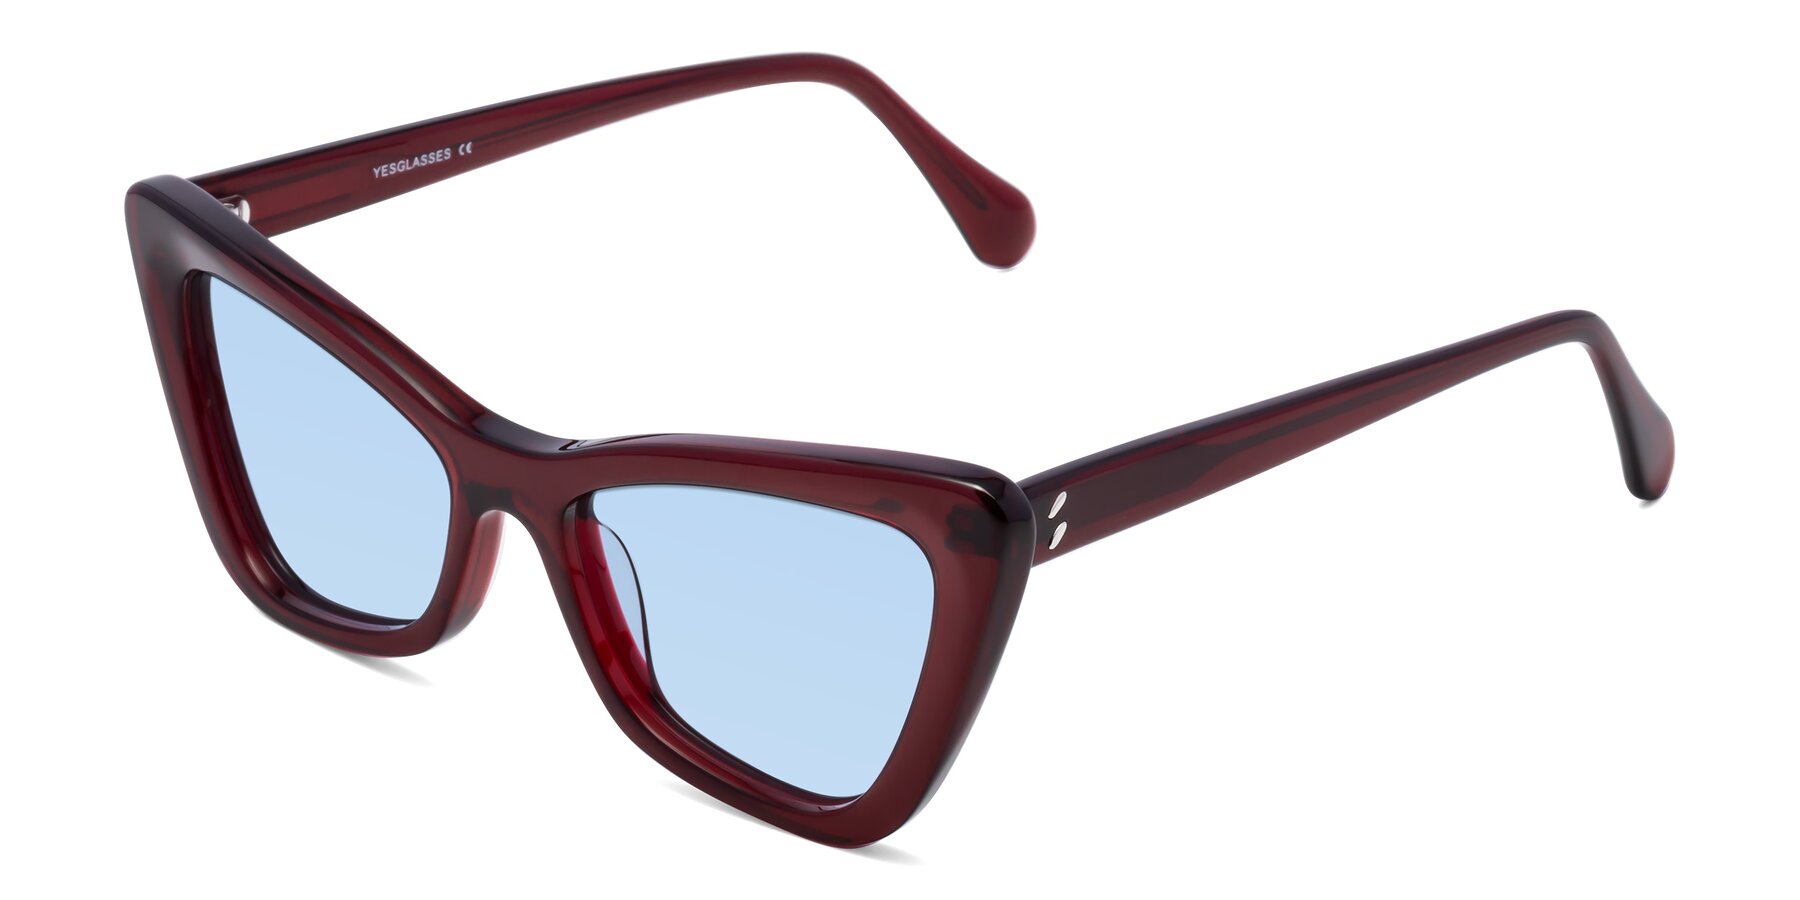 Angle of Rua in Wine with Light Blue Tinted Lenses